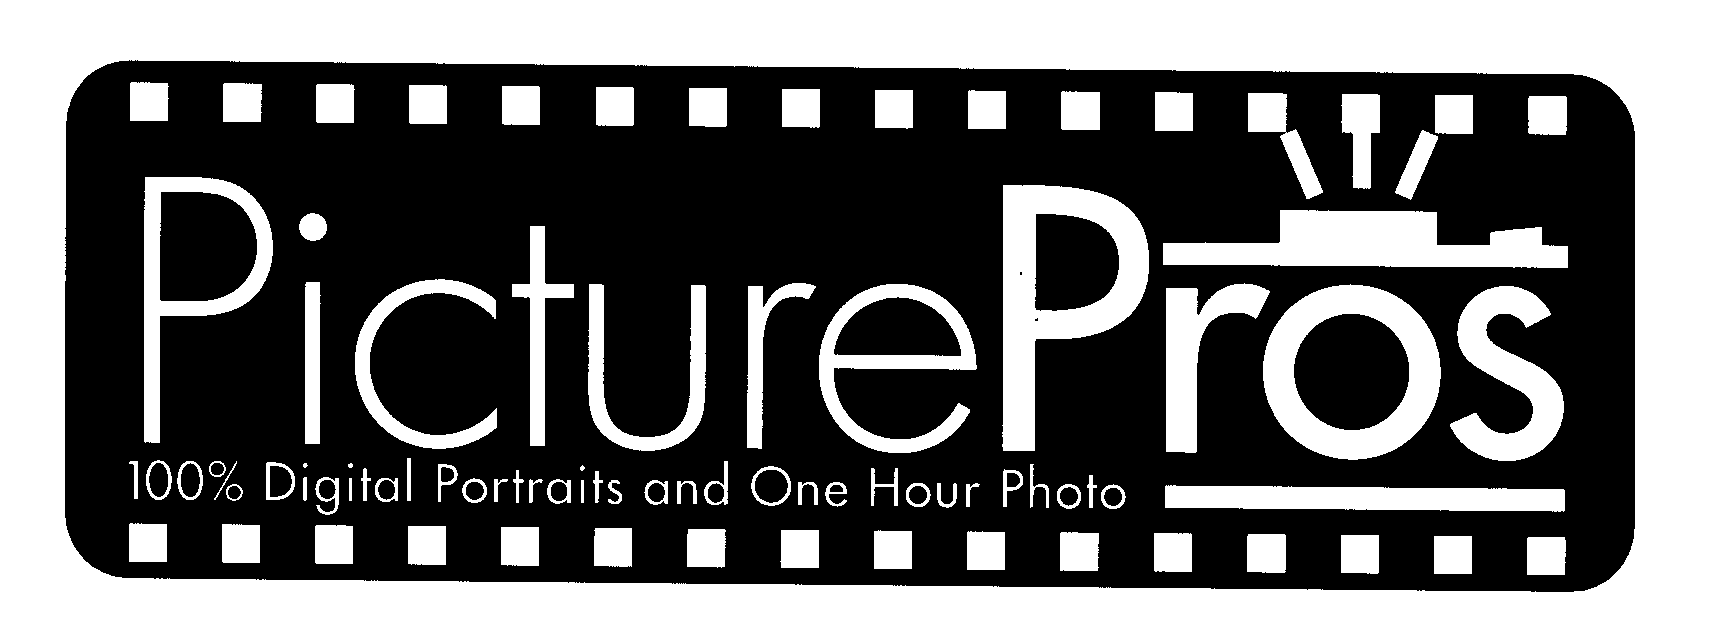  PICTUREPROS 100% DIGITAL PORTRAITS AND ONE HOUR PHOTO